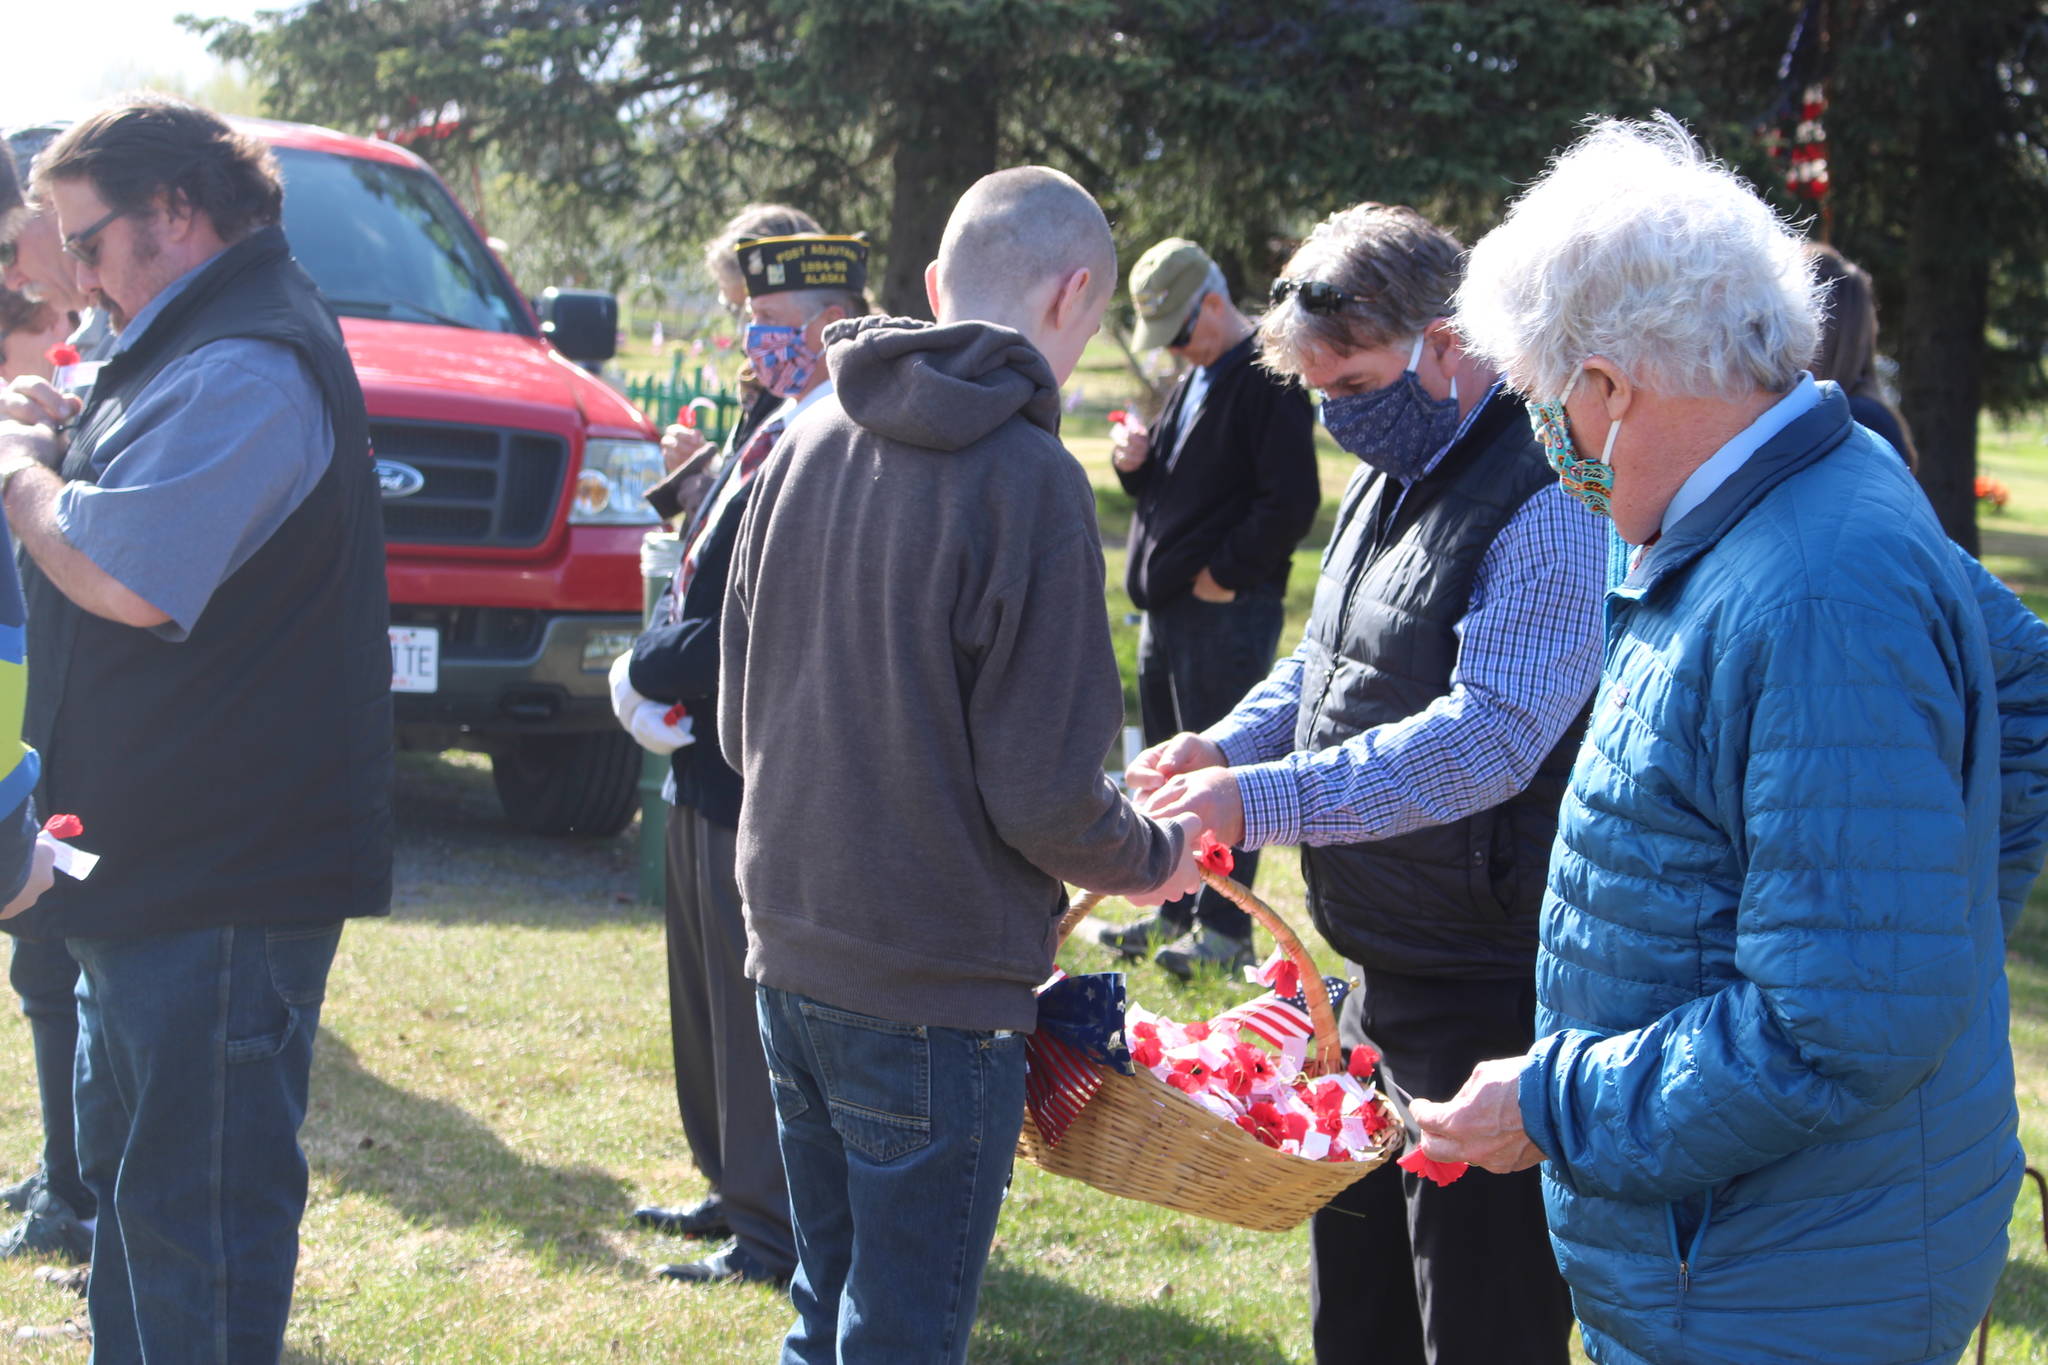 Kenai Mayor Brian Gabriel takes a poppy made by volunteers during the Memorial Day ceremony at the Kenai Cemetery on May 25, 2020. (Photo by Brian Mazurek/Peninsula Clarion)